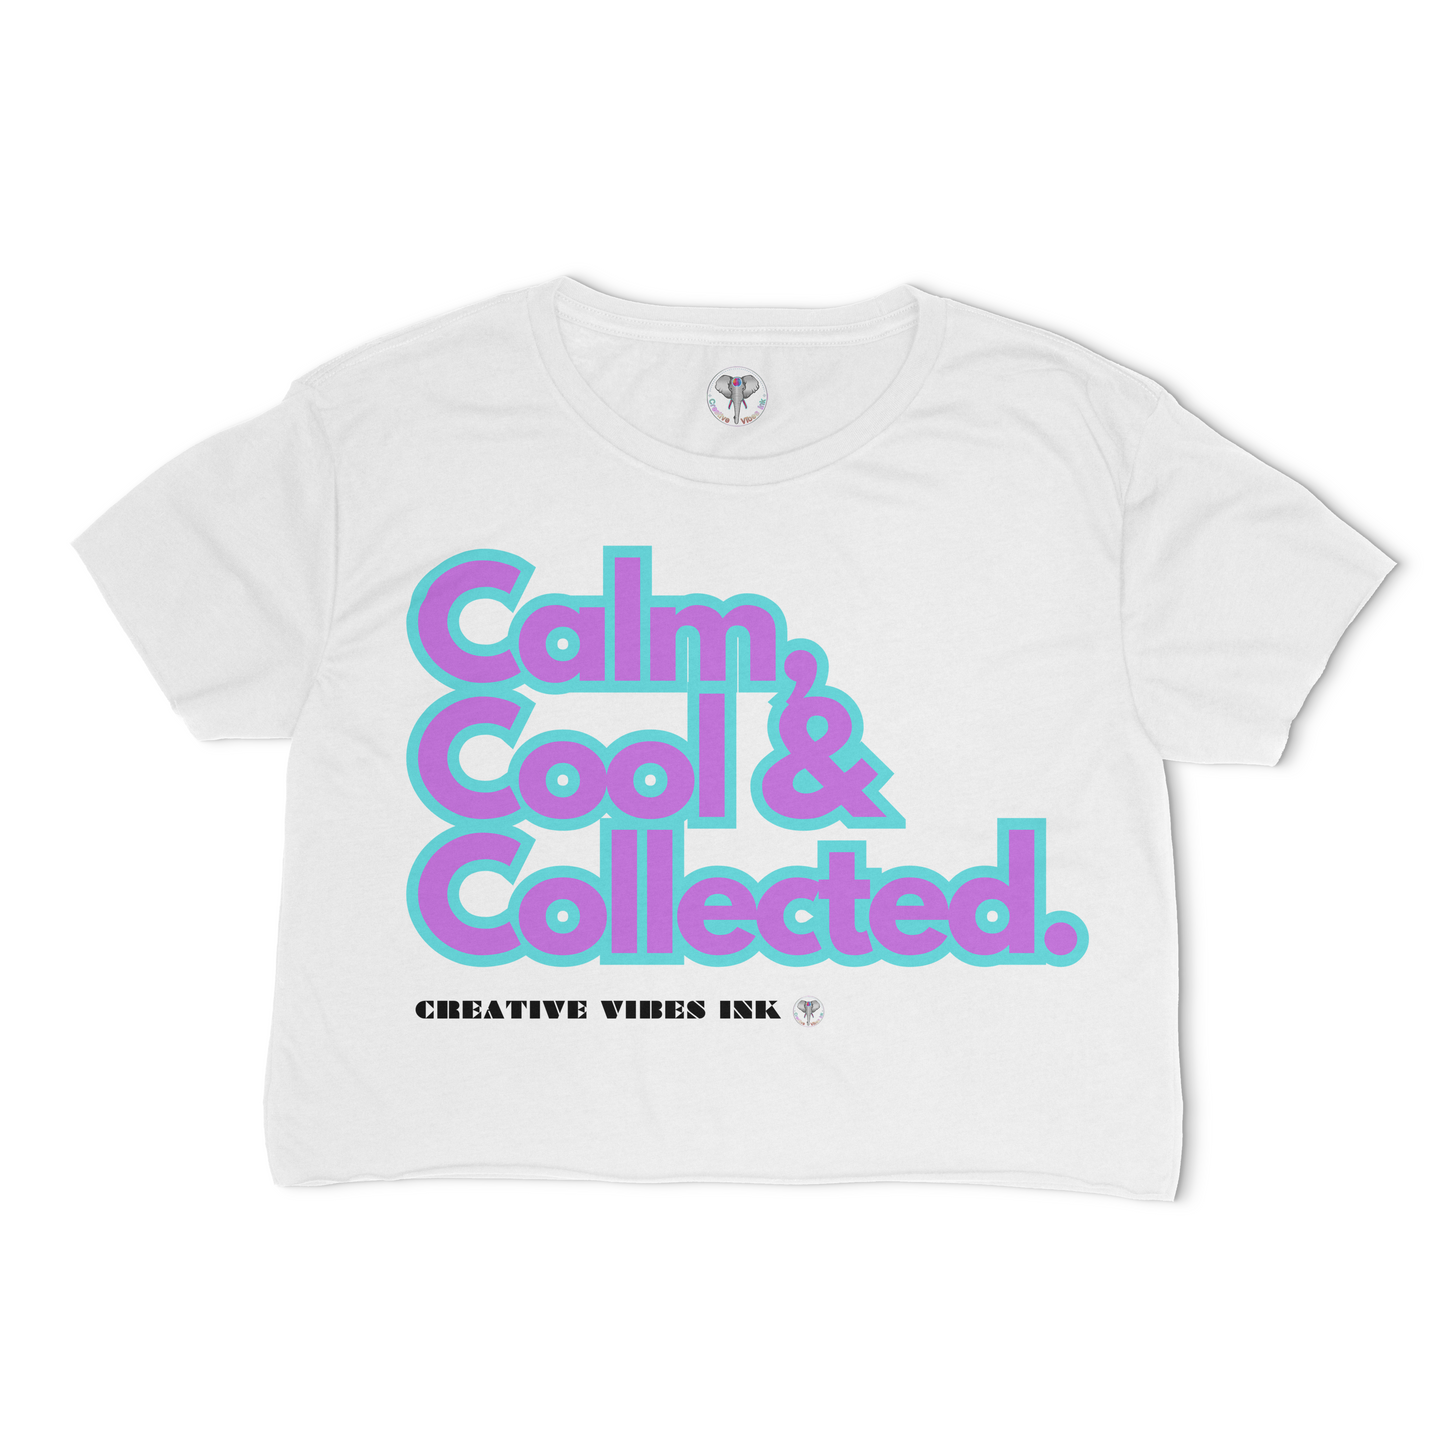 Calm, Cool & Collected Graphic Crop Top